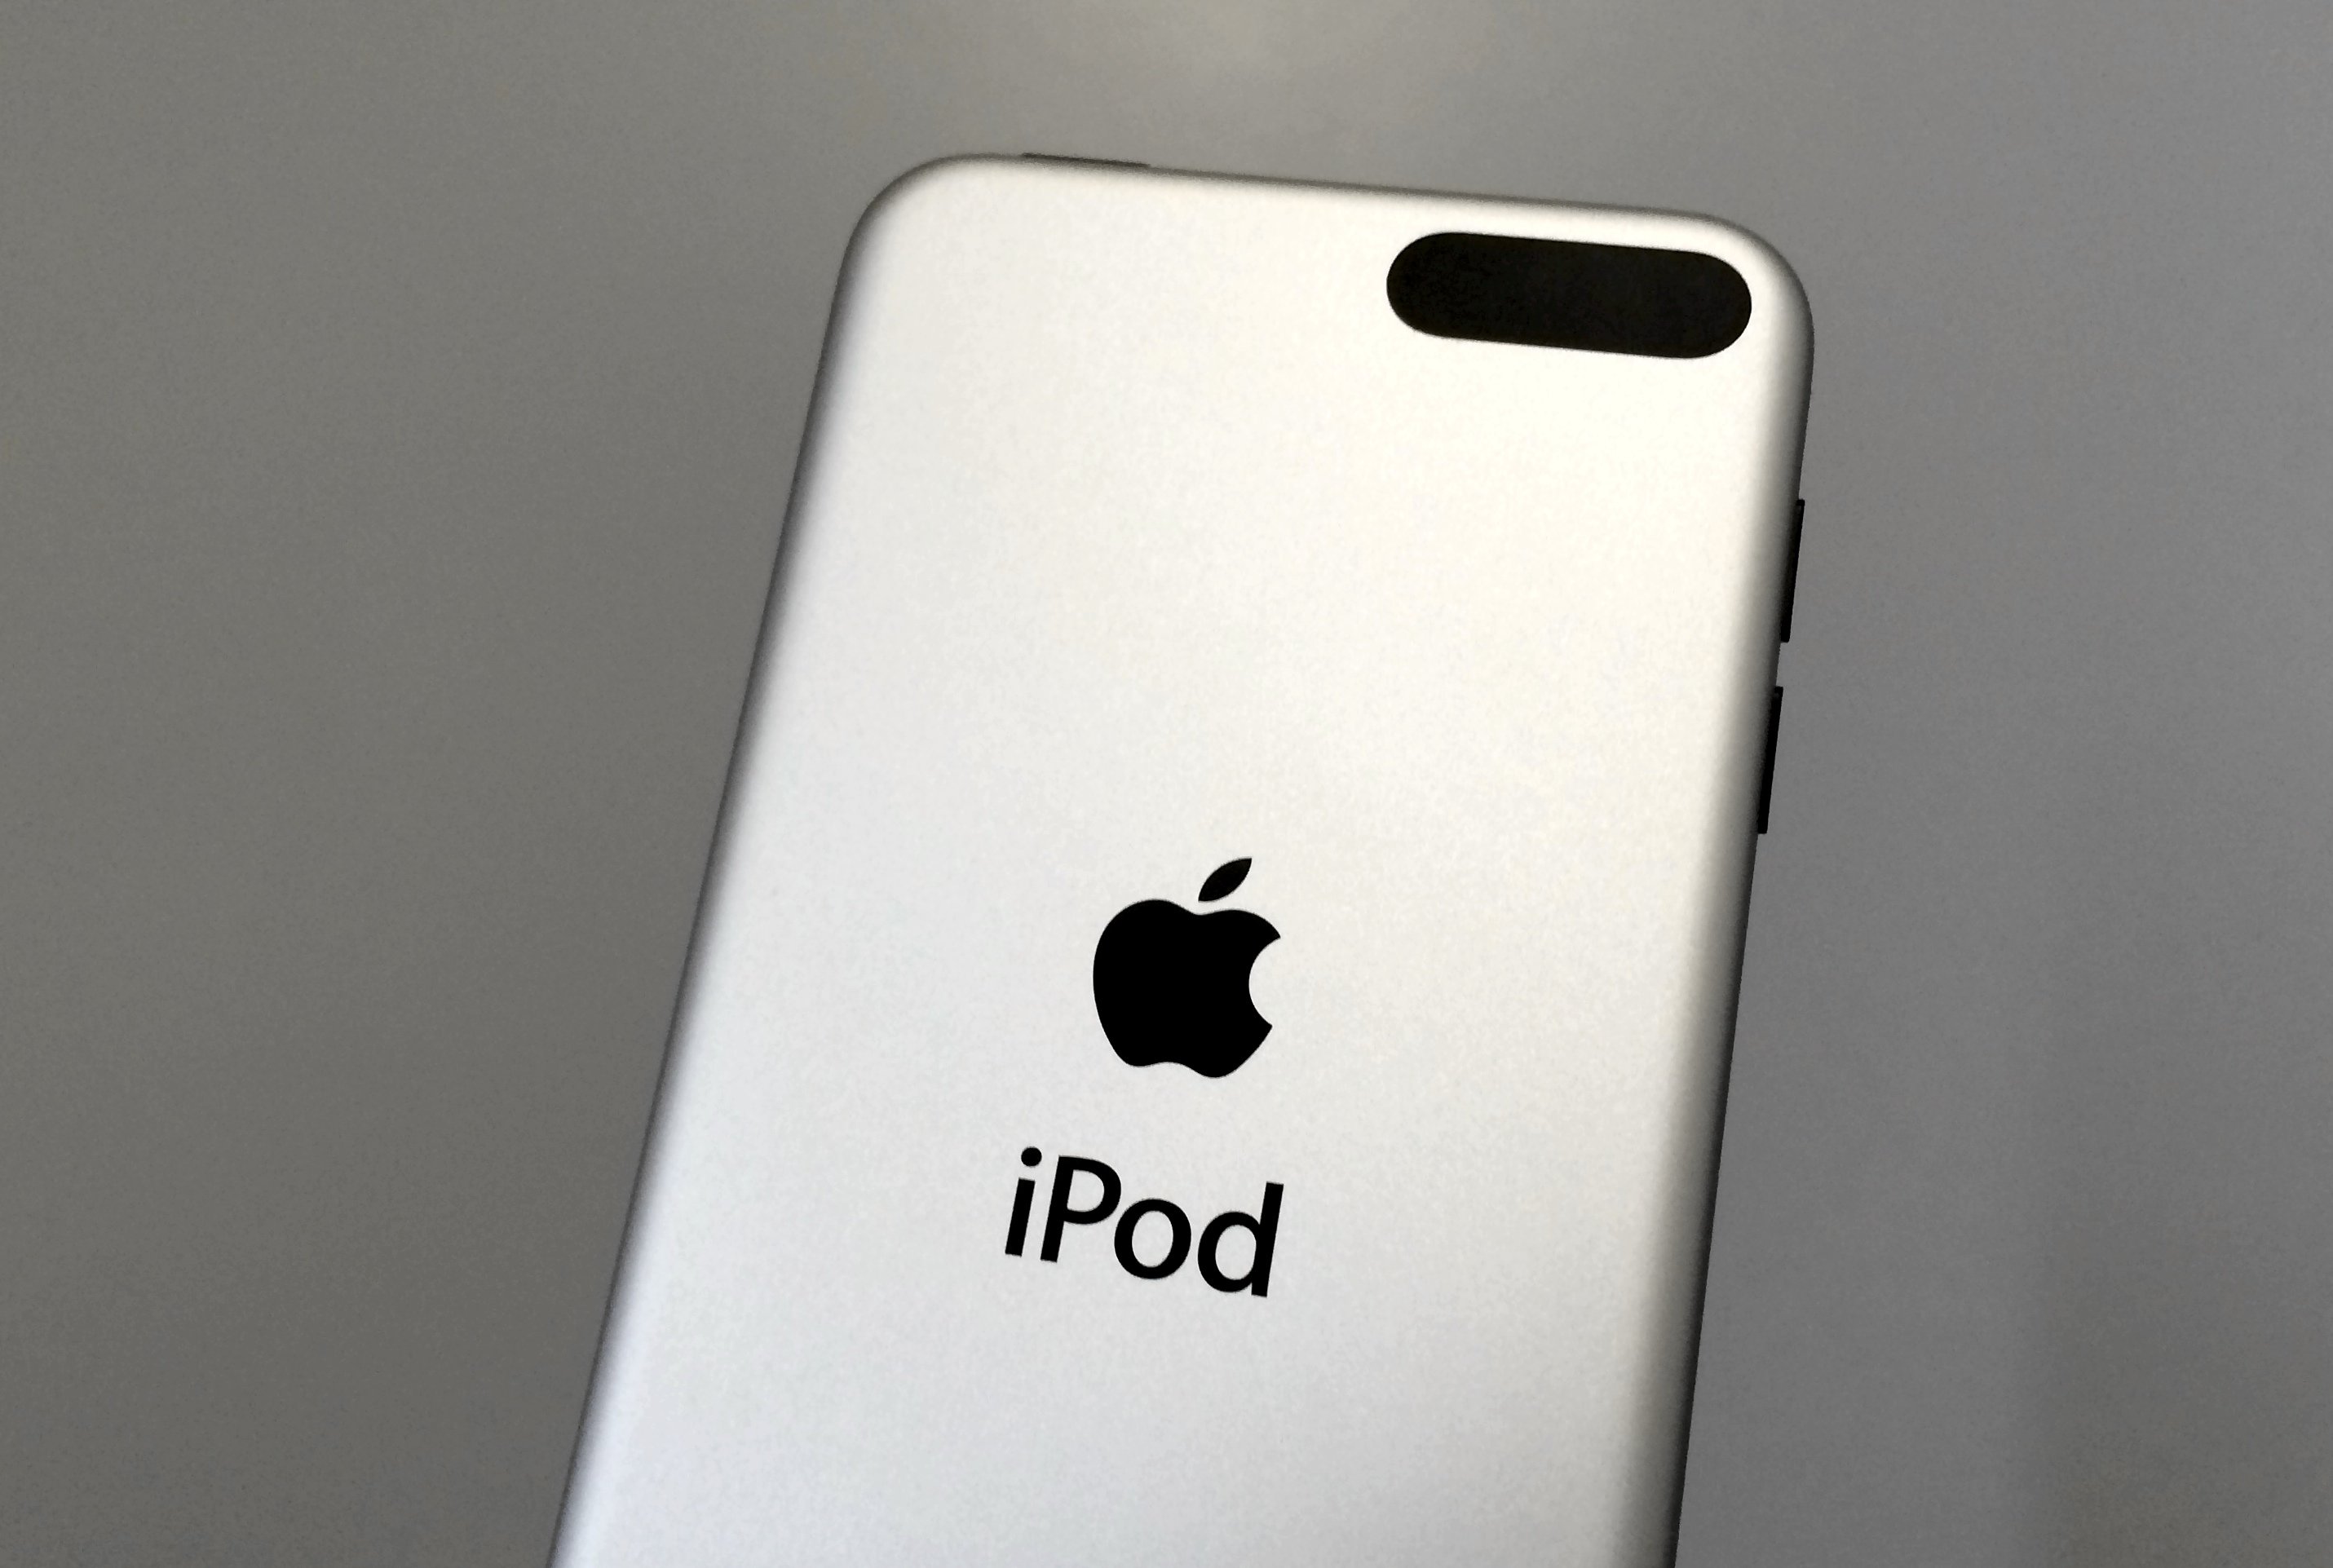 Shoppers are eager for an iPod touch 6th generation release date, but a new roadmap does not include a new iPod touch.